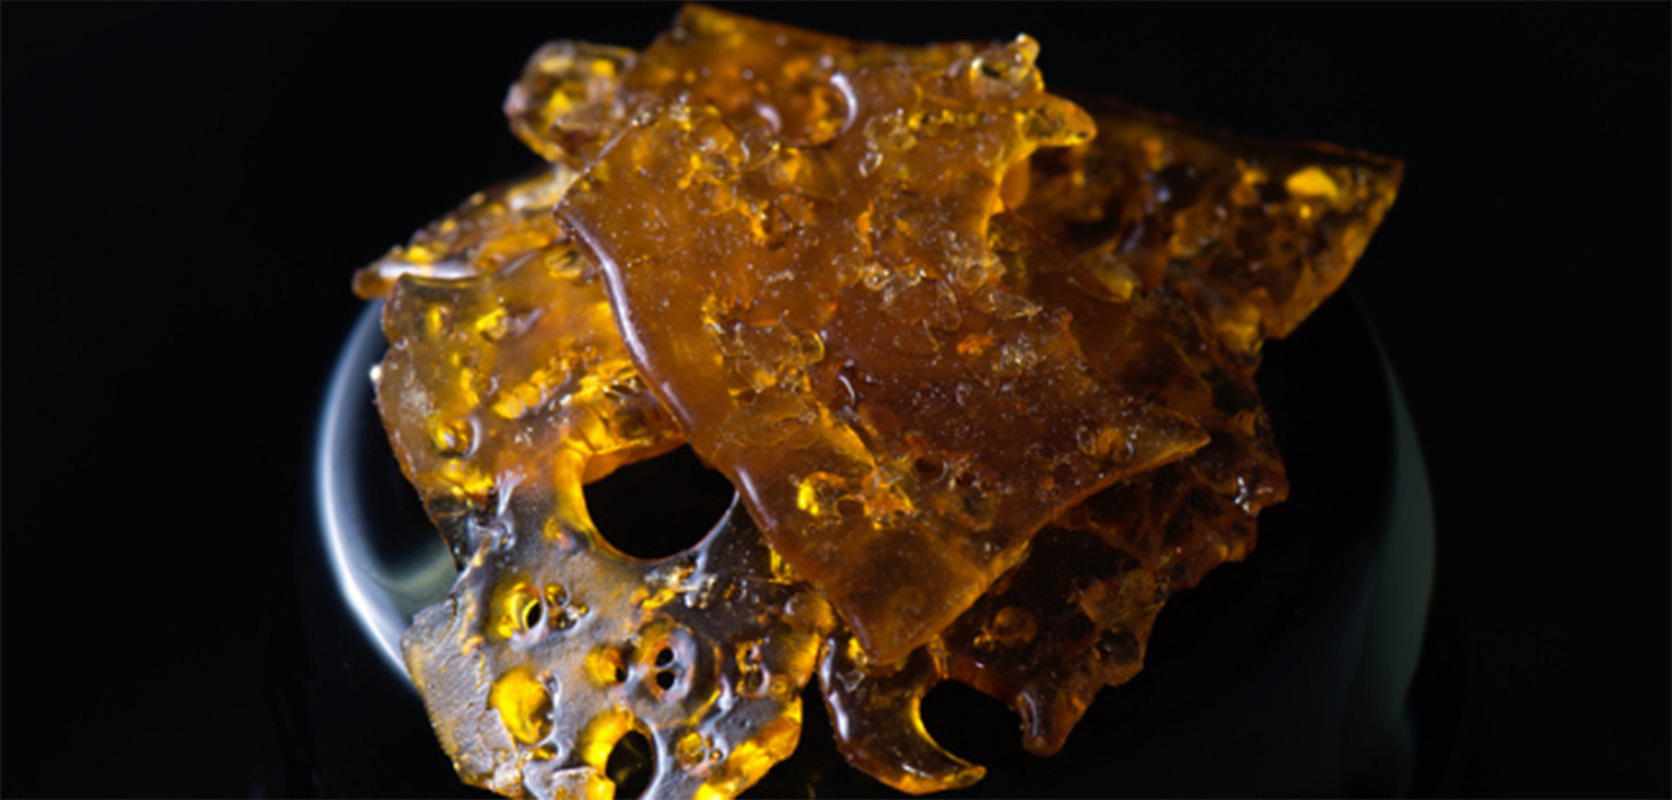 weed shatter and shatter THC for sale online Canada at Low Price Bud dispensary for cheapweed and value buds. Buy weed online Canada.